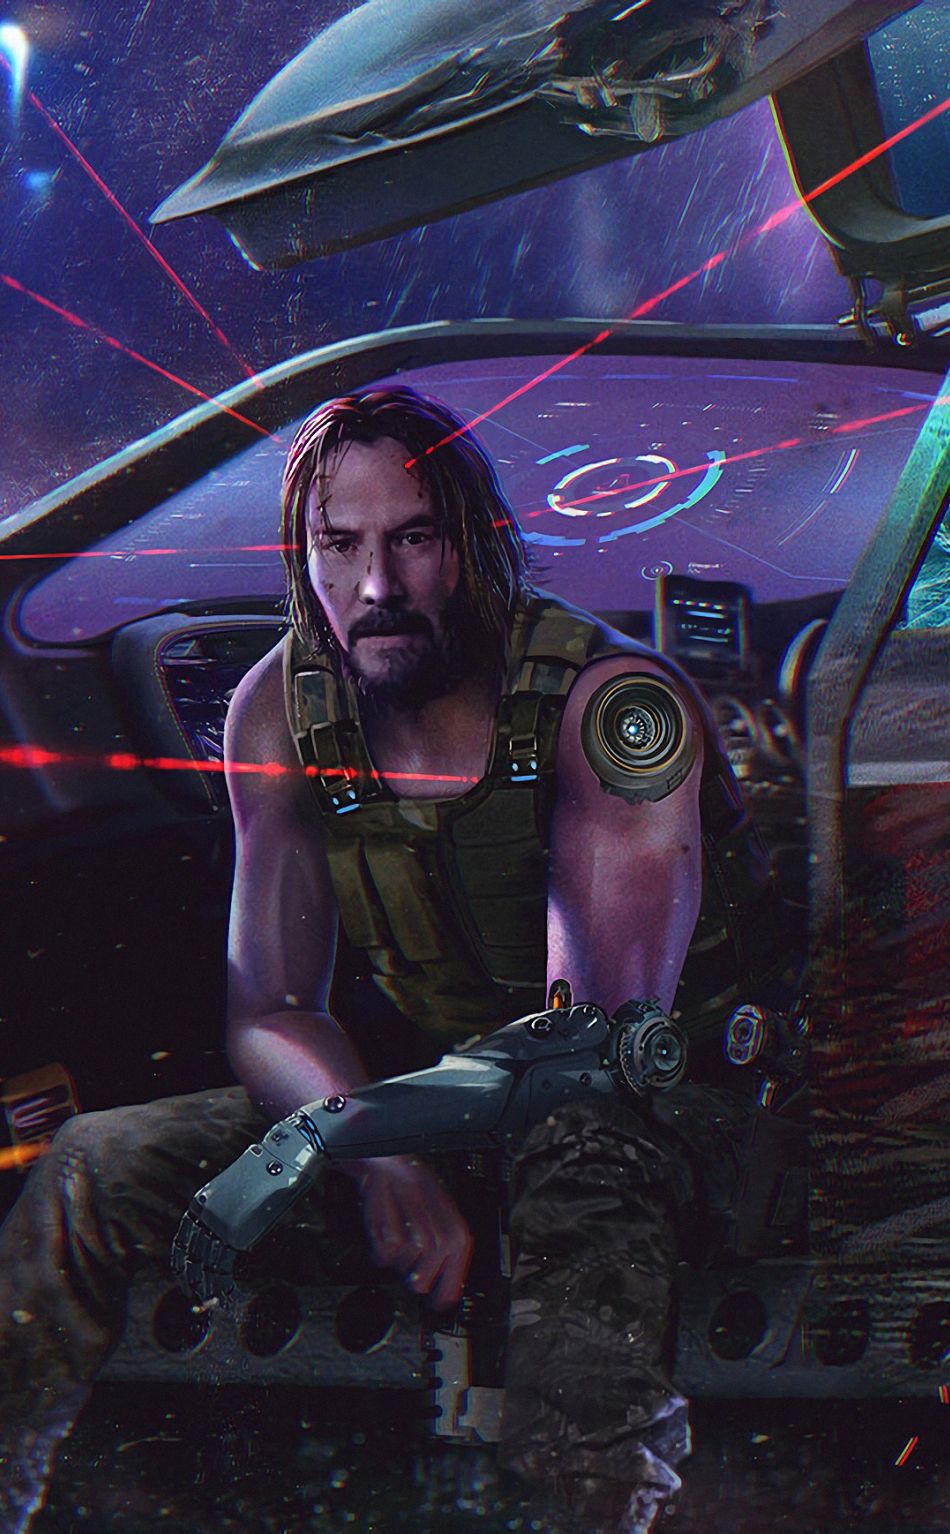 Download 950x1534 wallpaper cyberpunk keanu reeves, video game, iphone, 950x1534 HD image, background, 22156